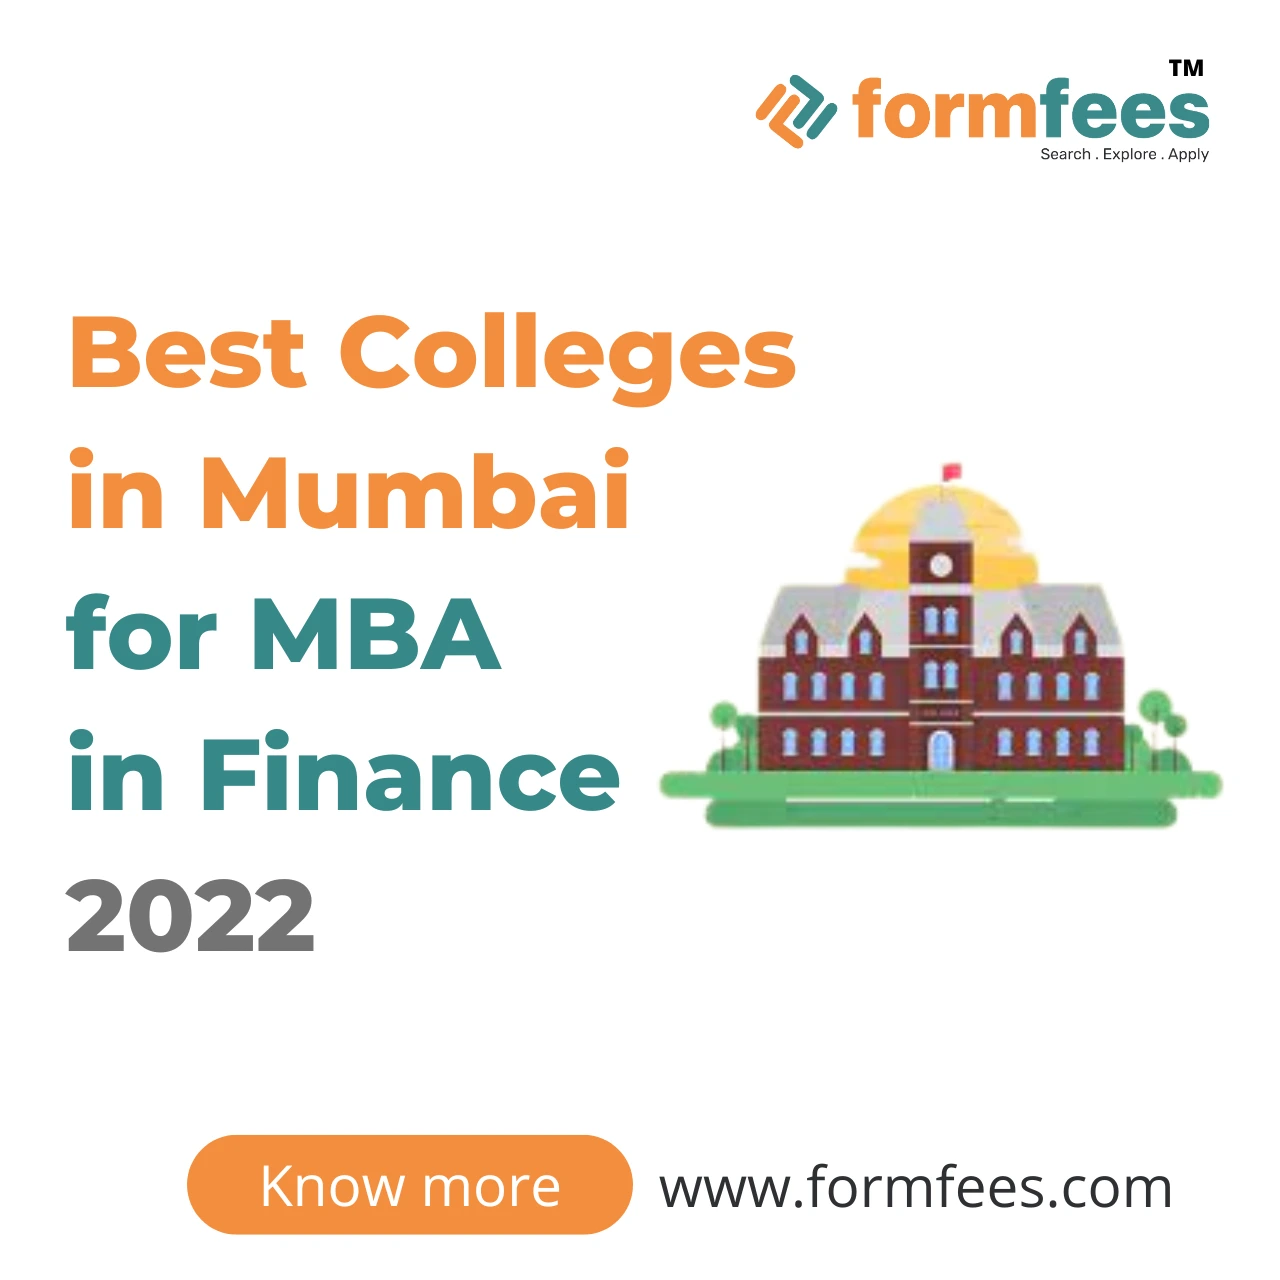 Best Colleges in Mumbai for MBA in Finance 2022 (1)